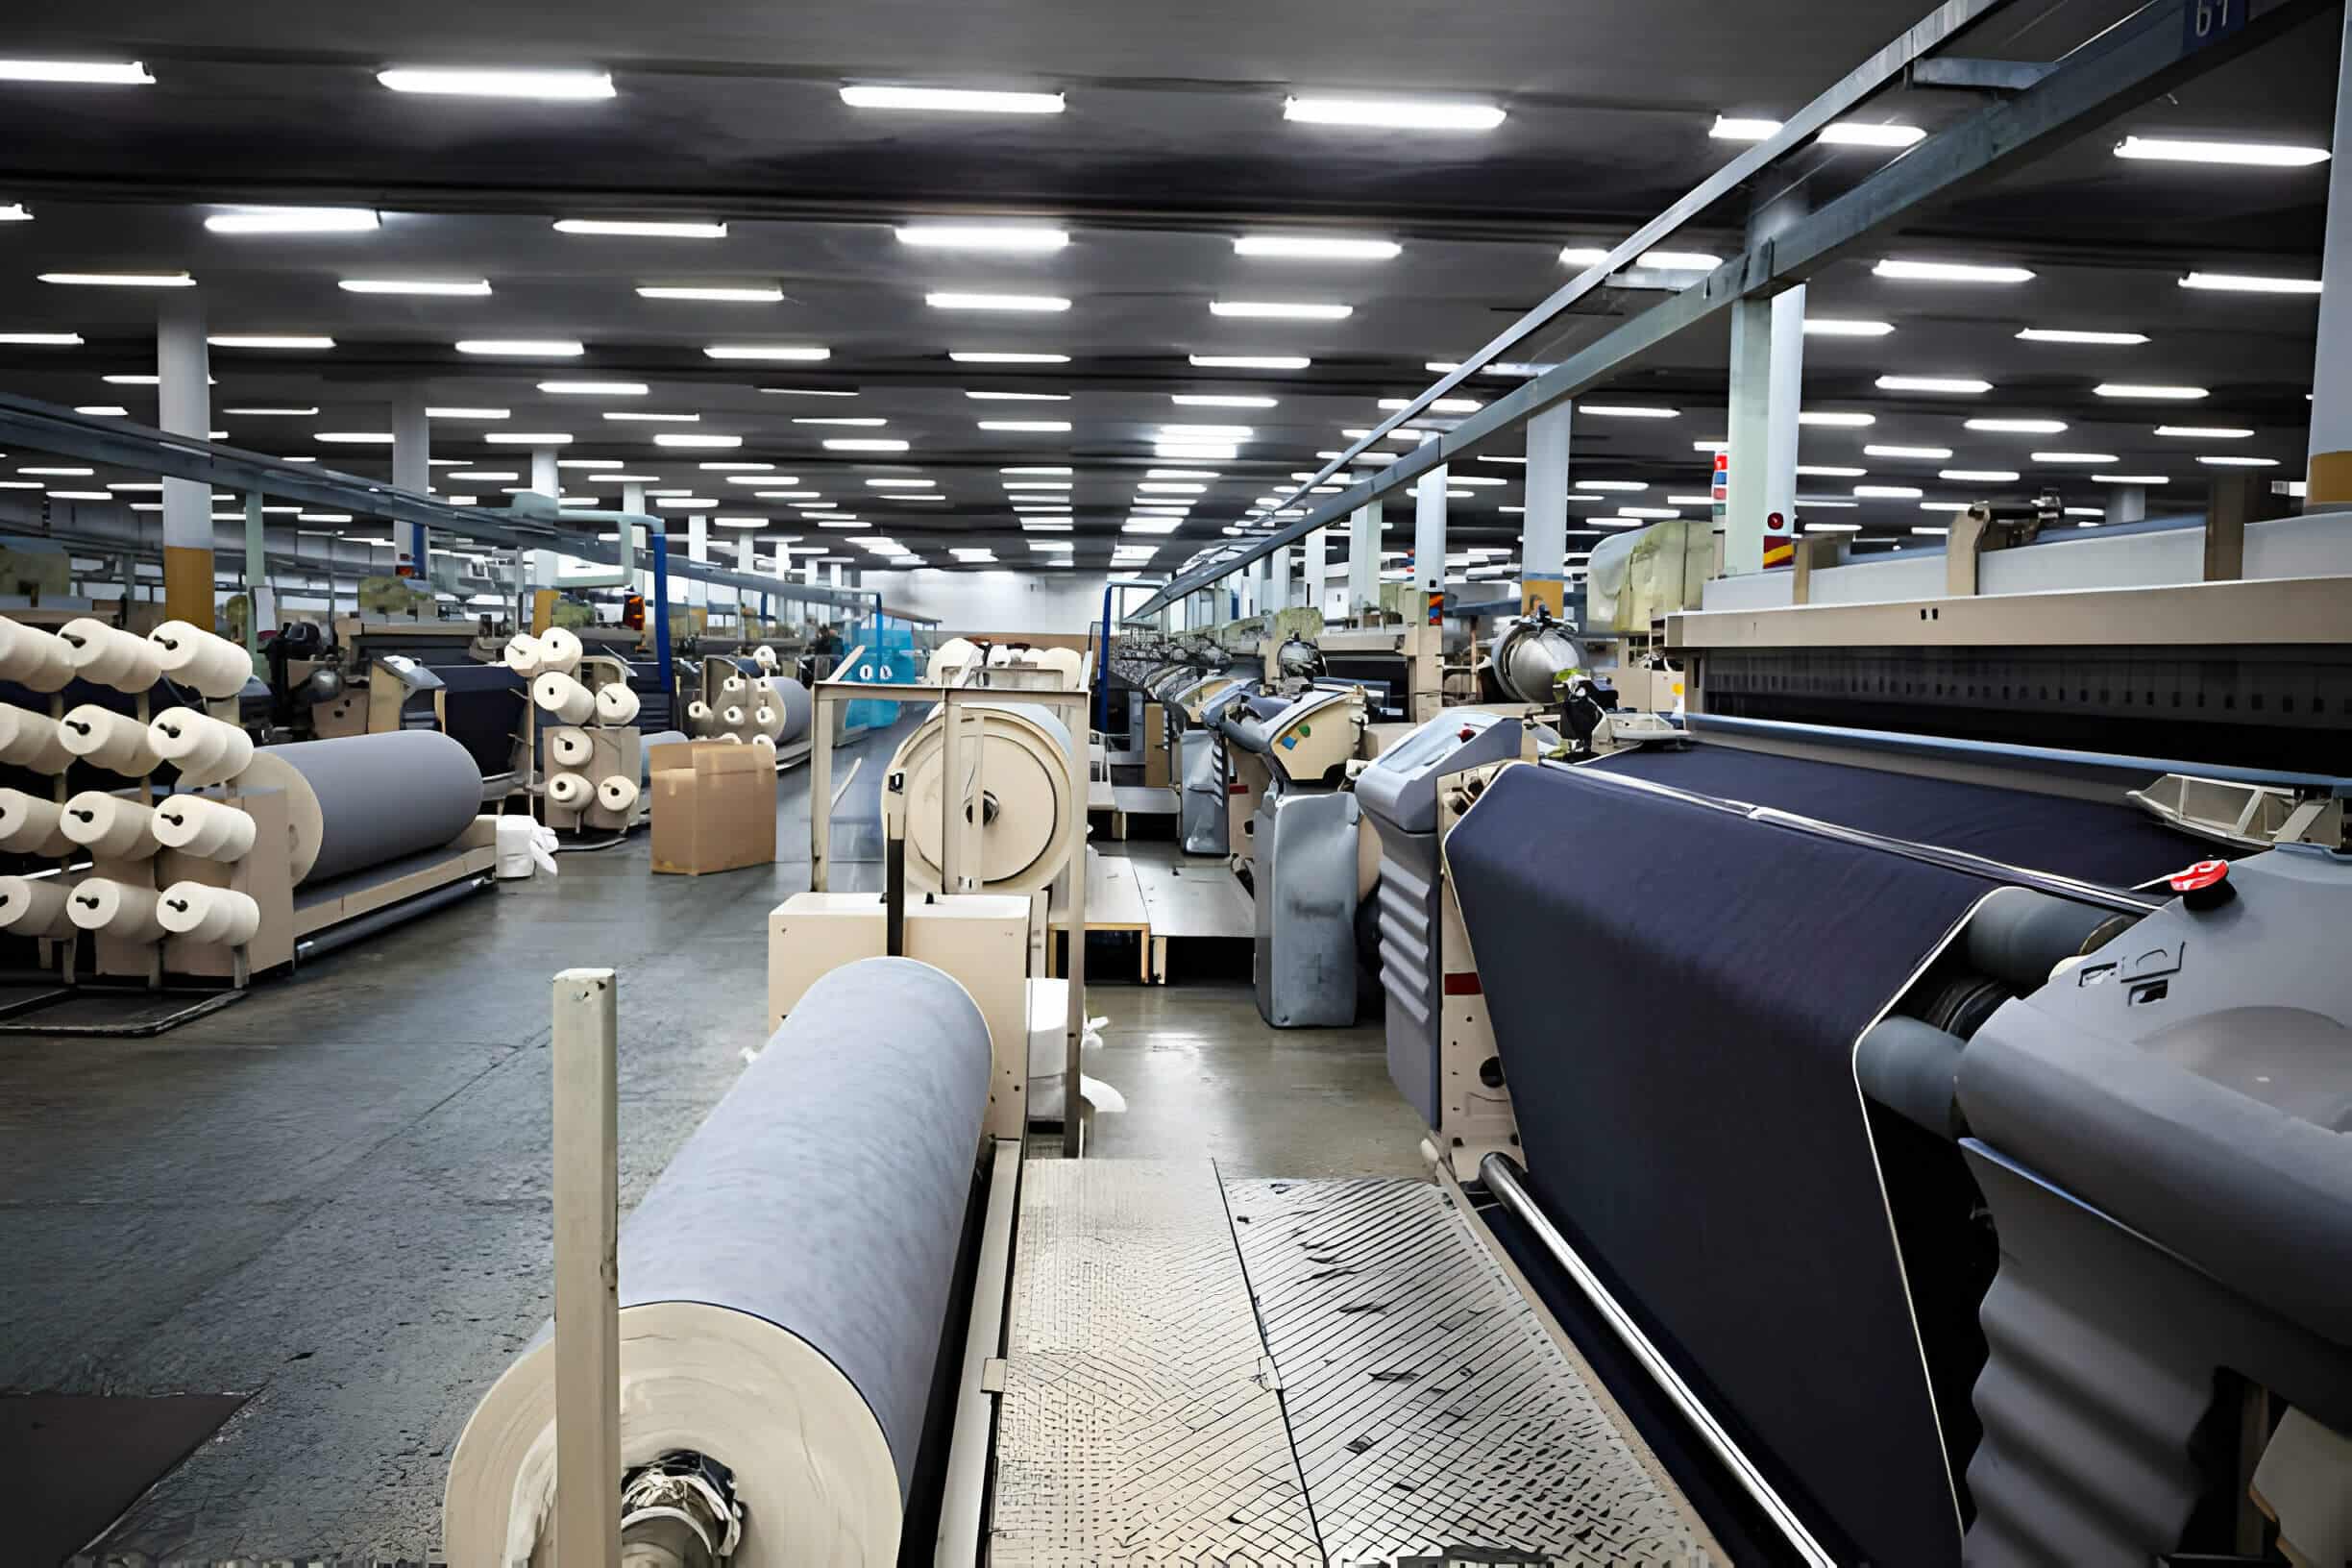 The machines working in a fabric production factory.